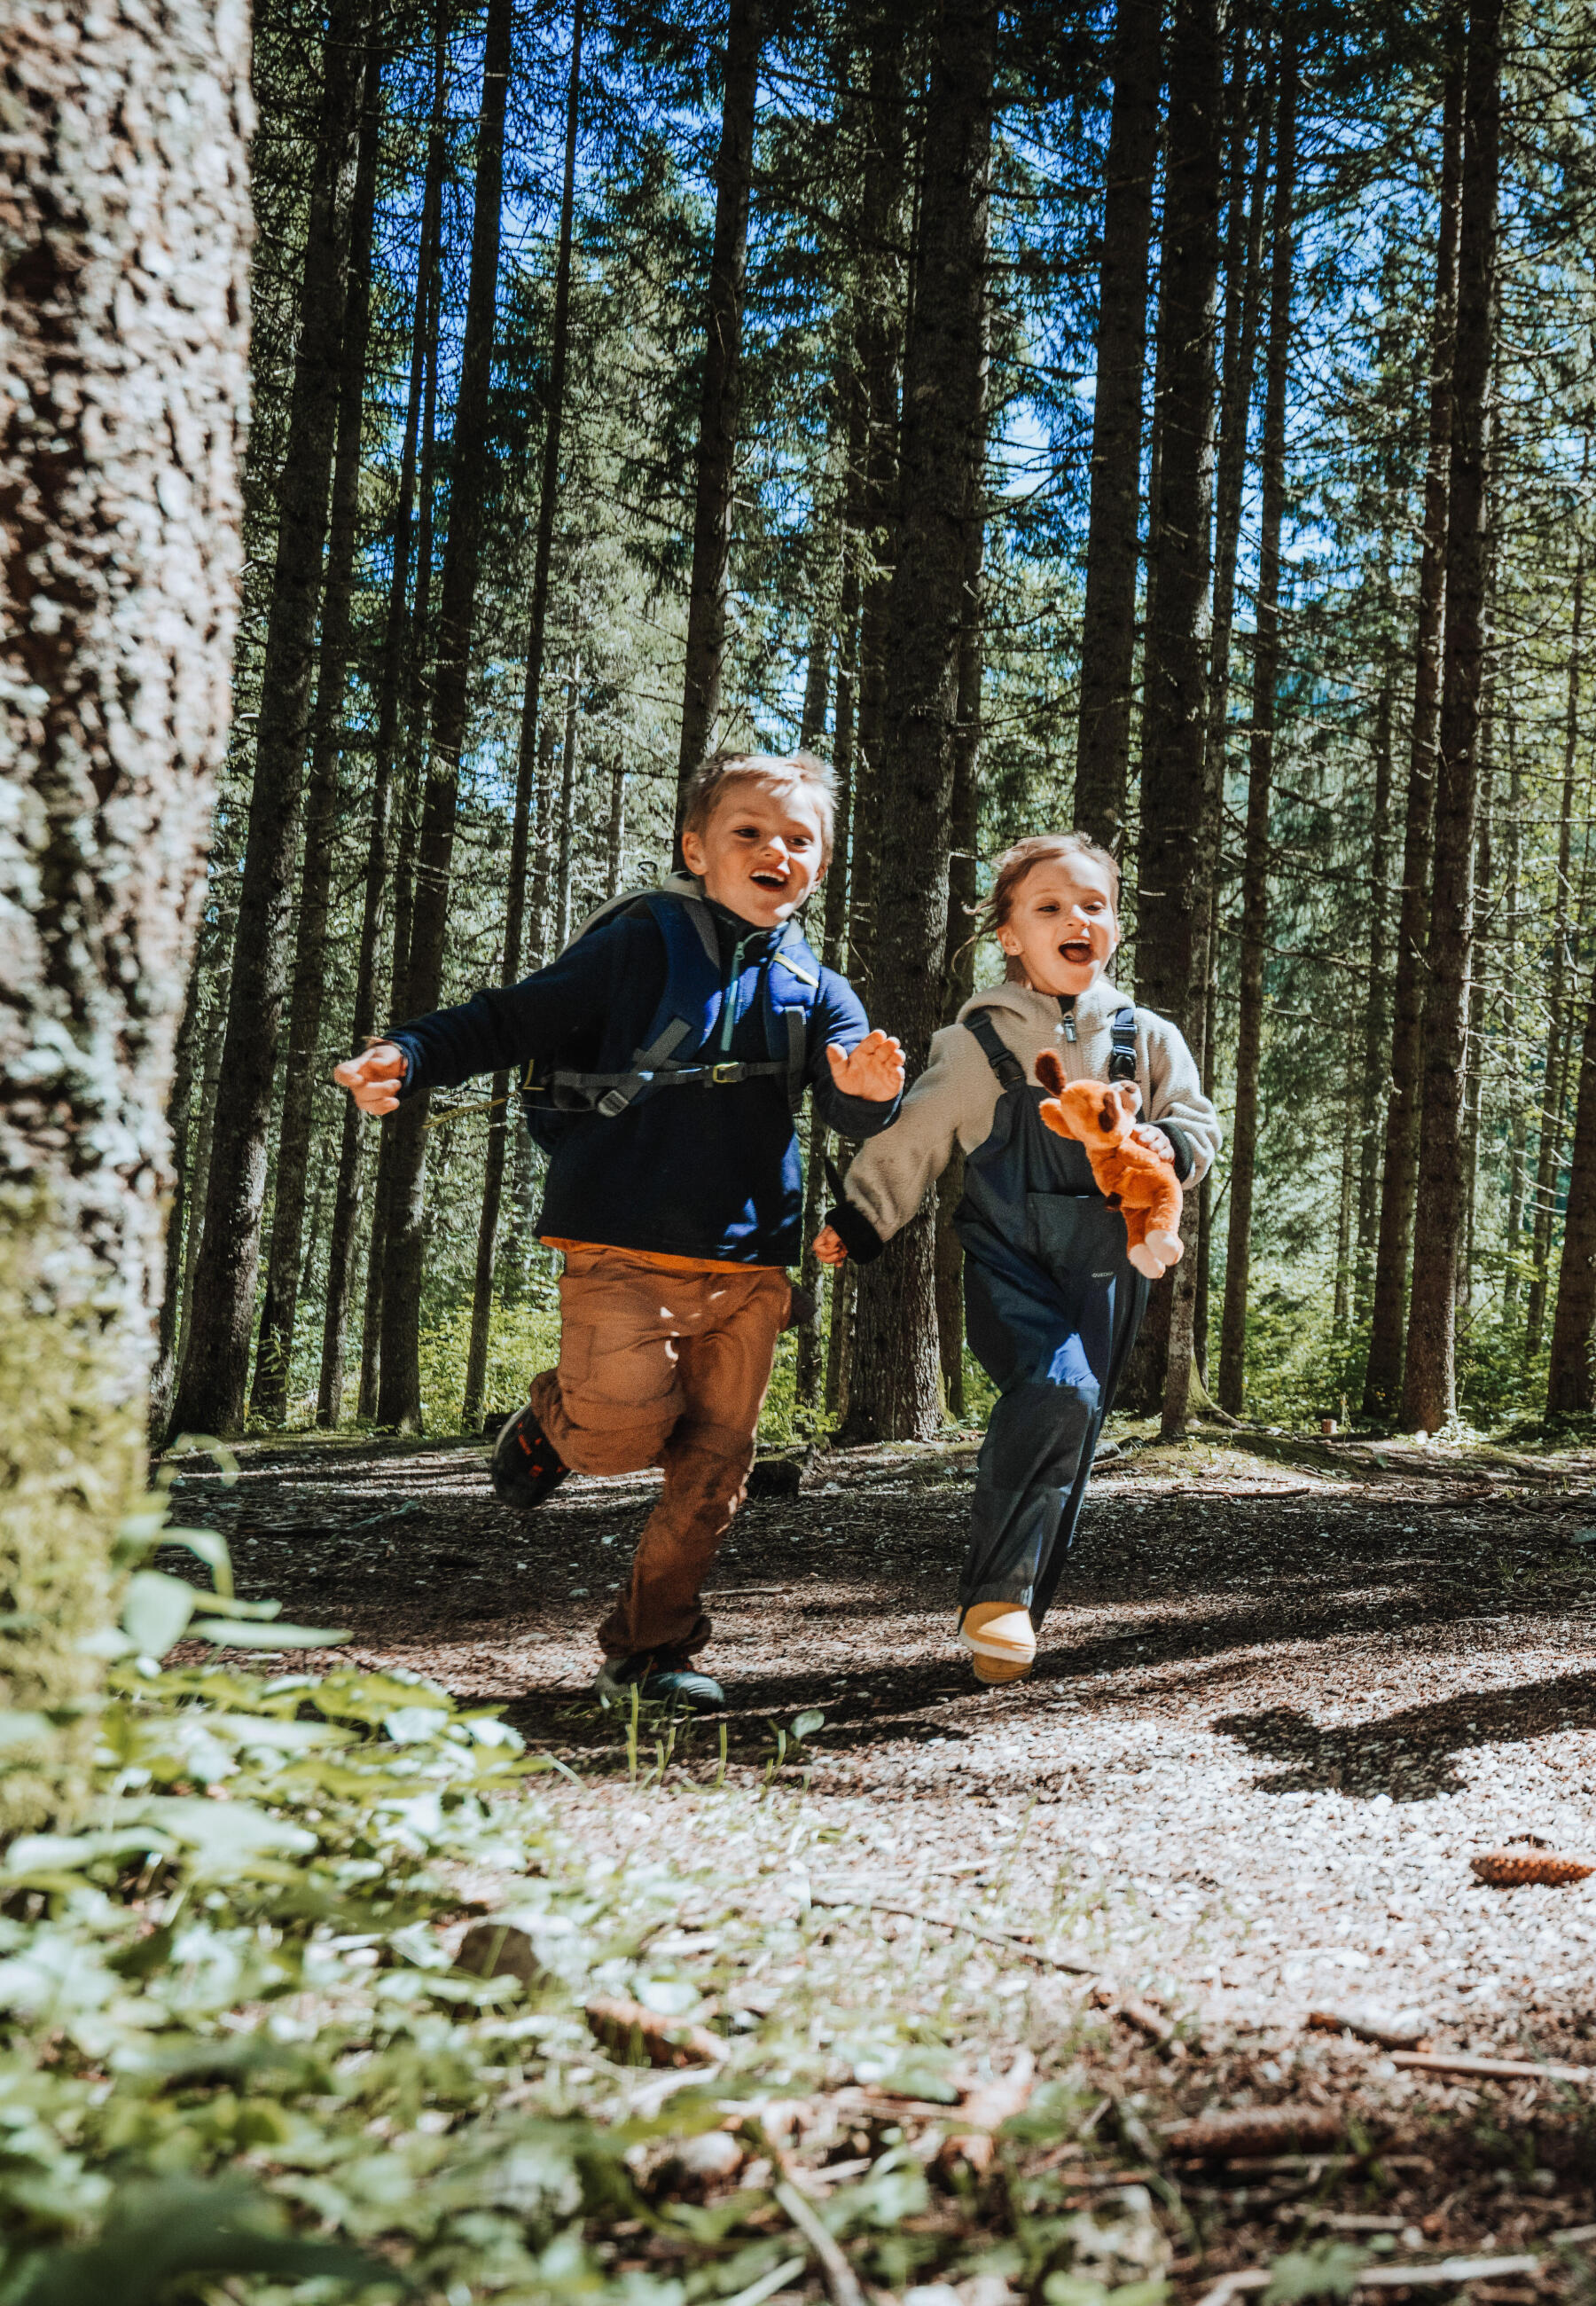 Choosing the right babies' hiking shoes